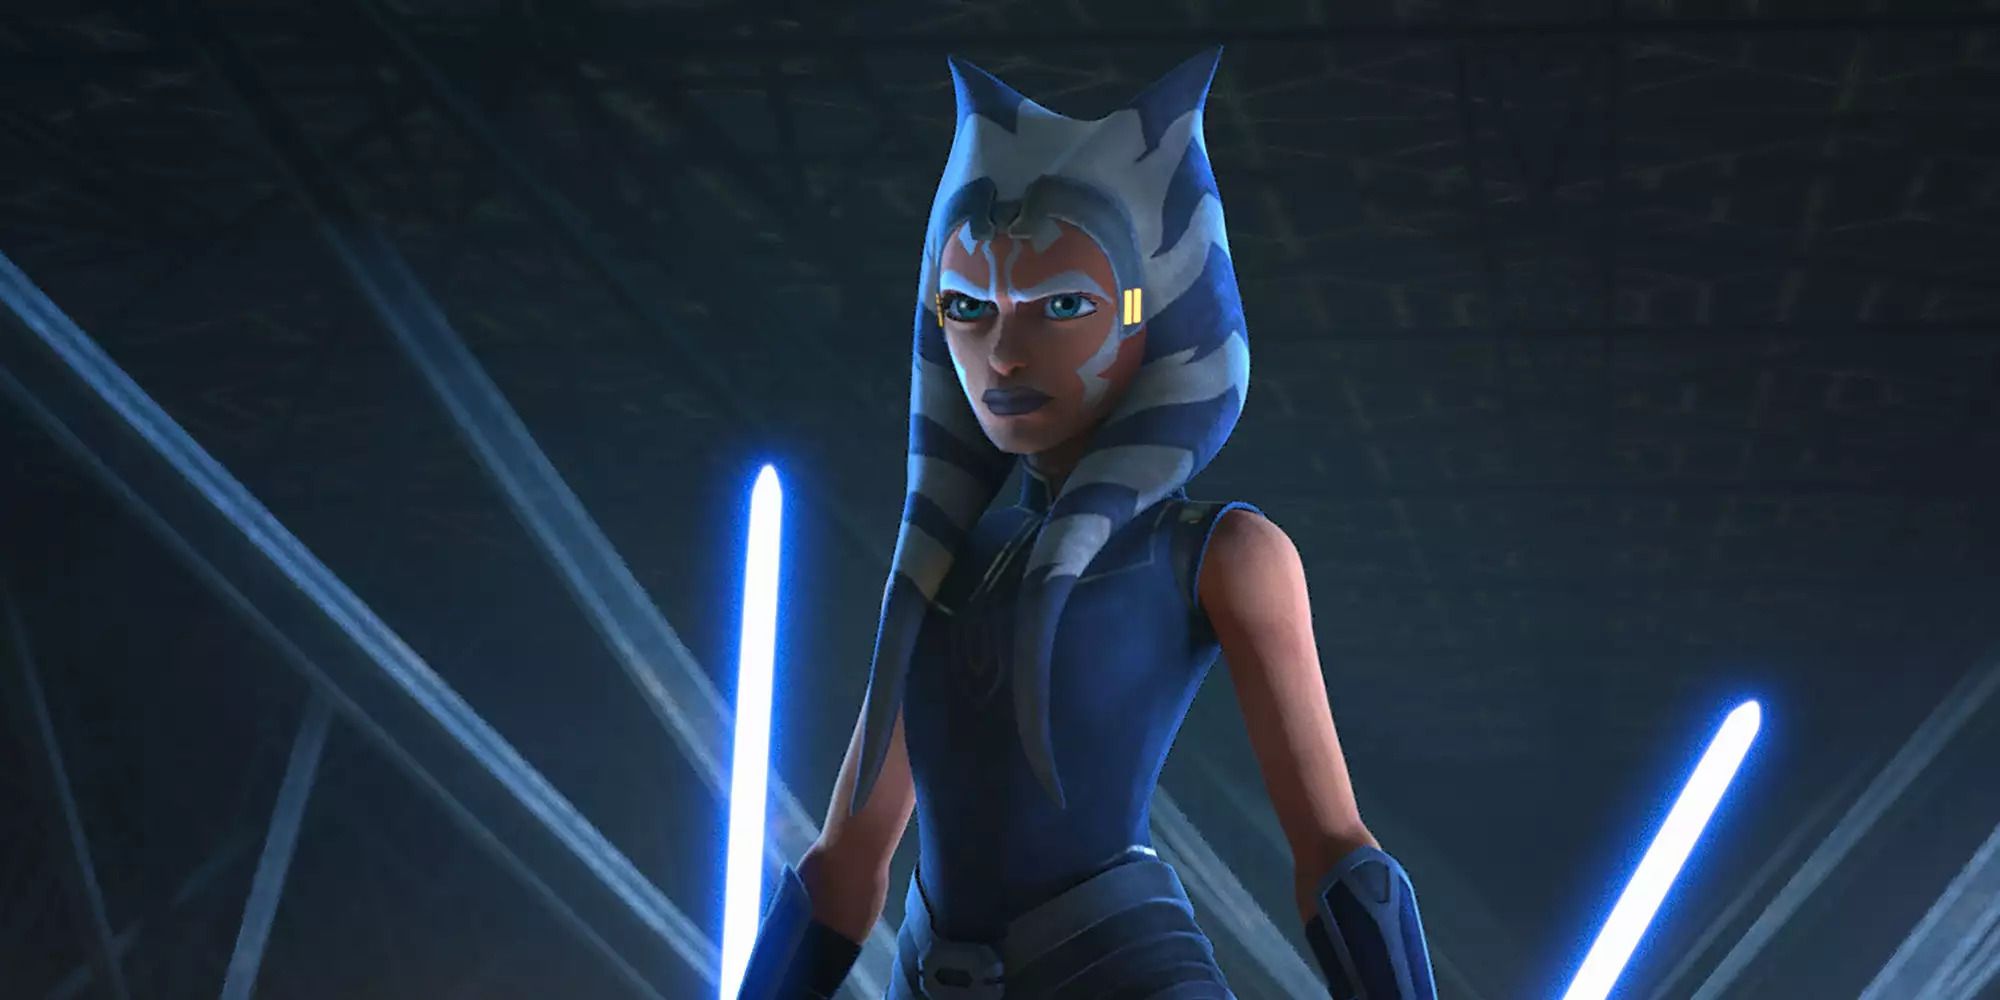 Ahsoka Tano holding her blue lightsabers from 'Star Wars: The Clone Wars'